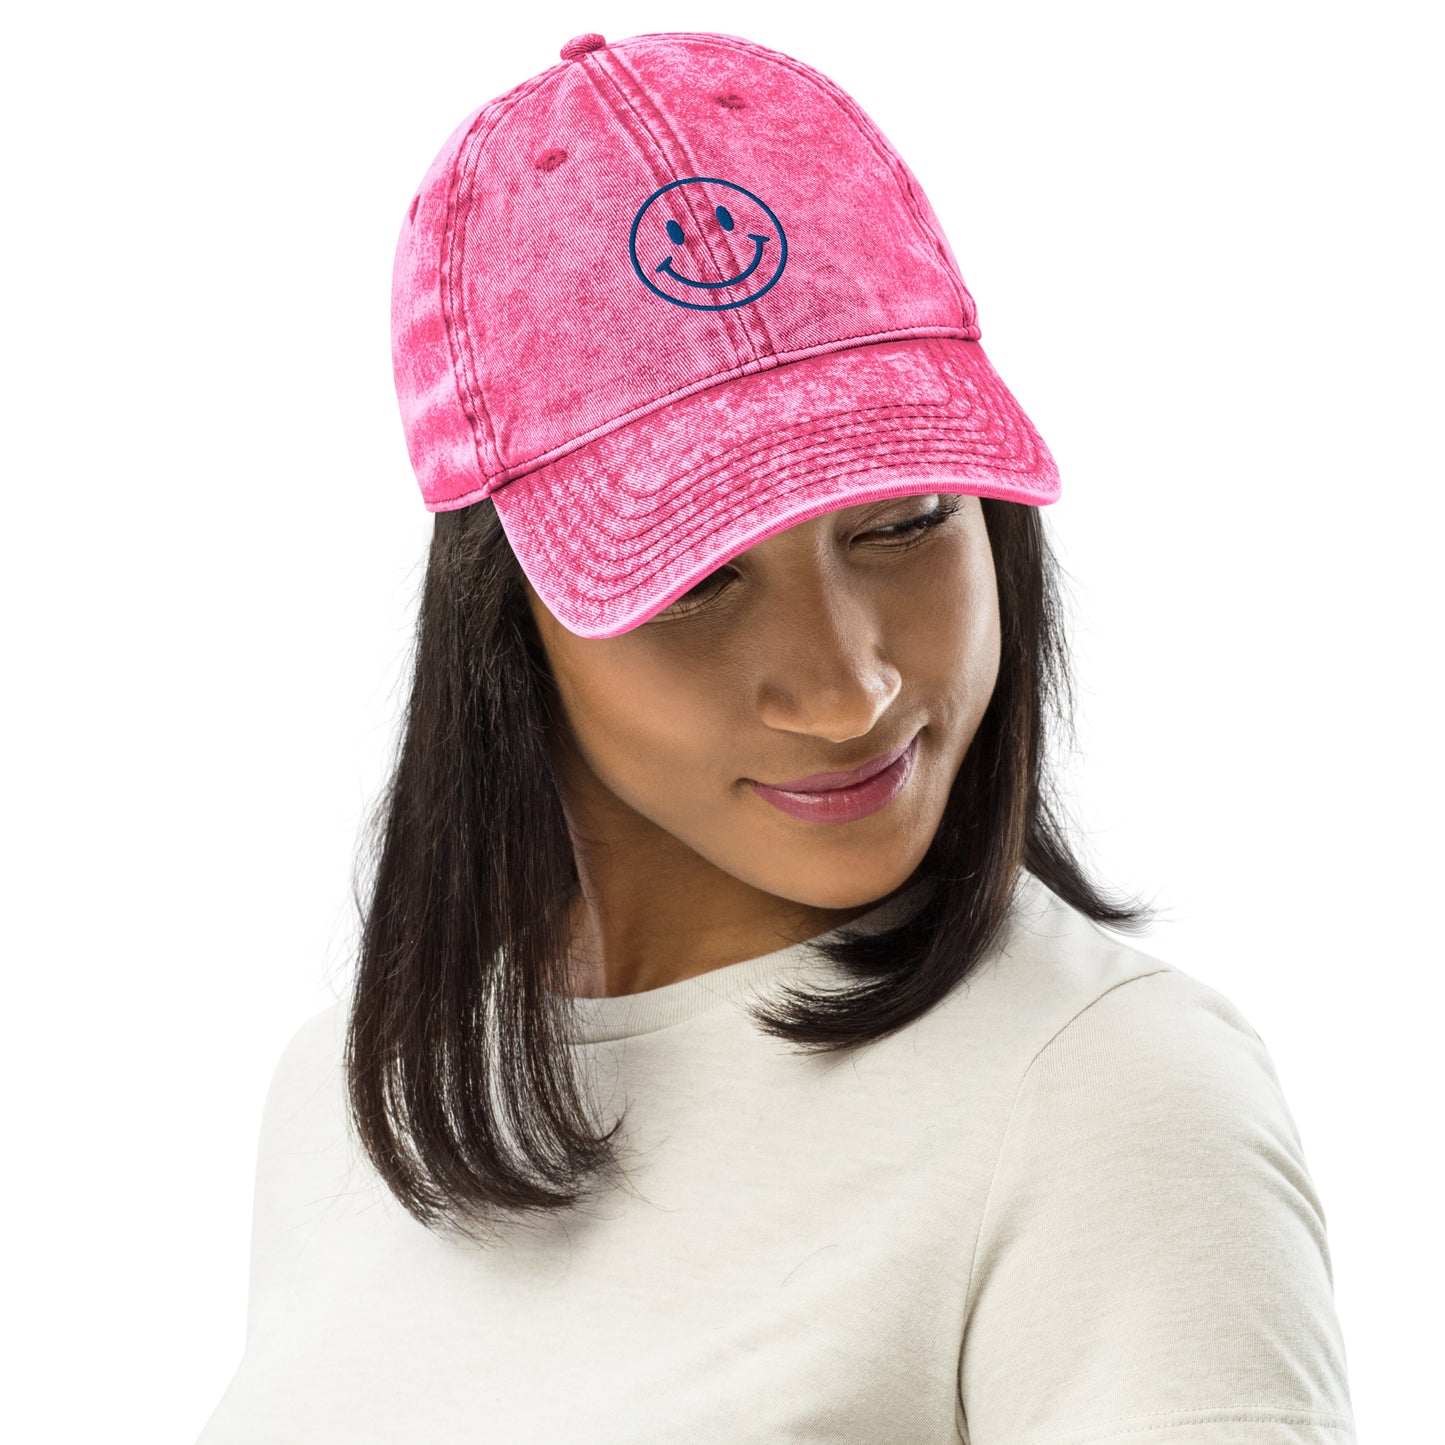 a woman wearing a pink hat and a pink hat 